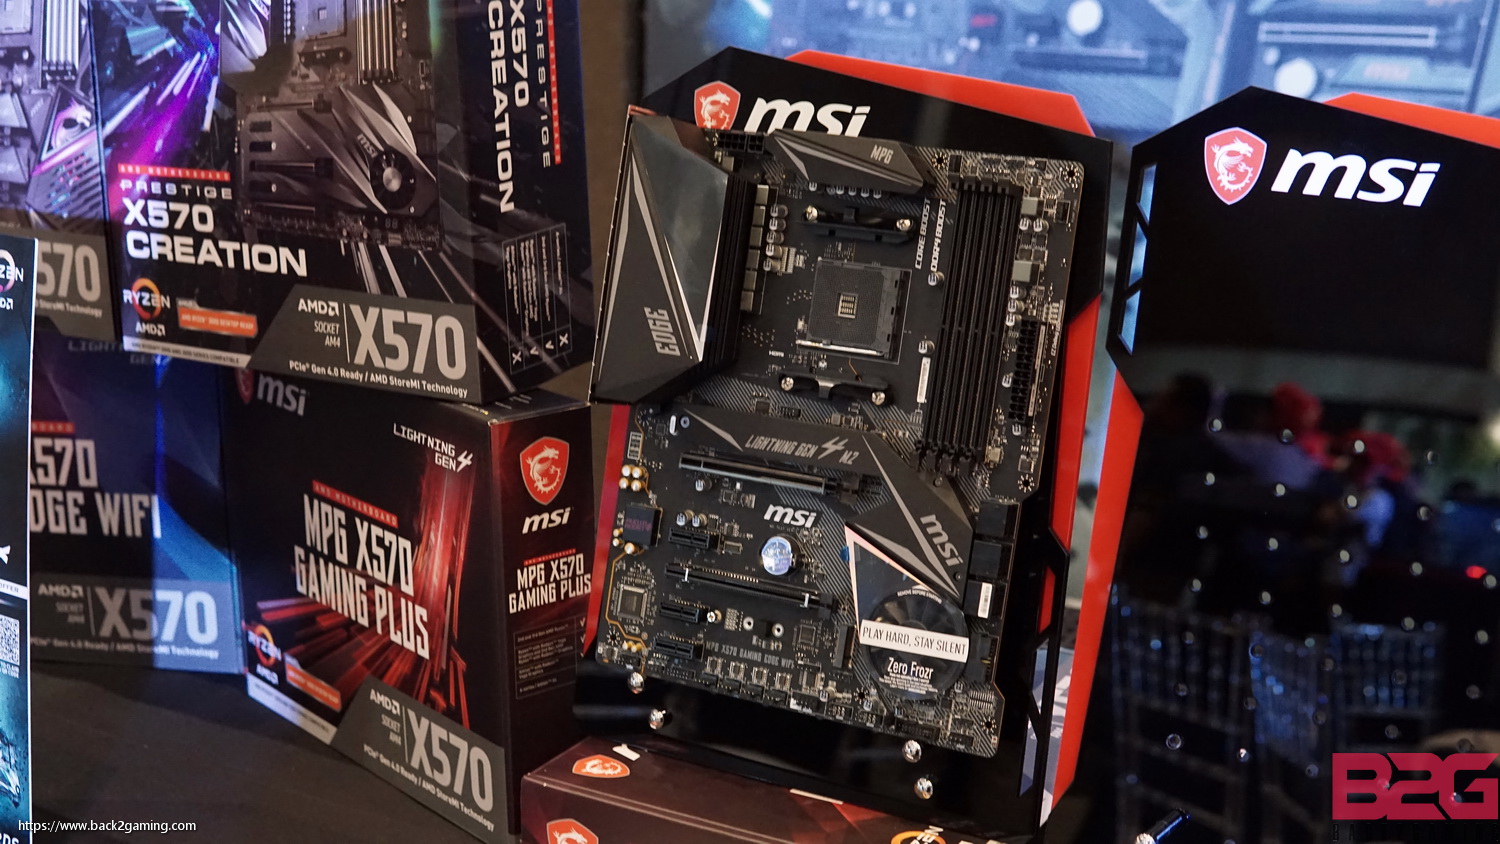 MSI x Discovery Presents eSports: Rise of the King Event Kicks off with Full Line of AMD Products -